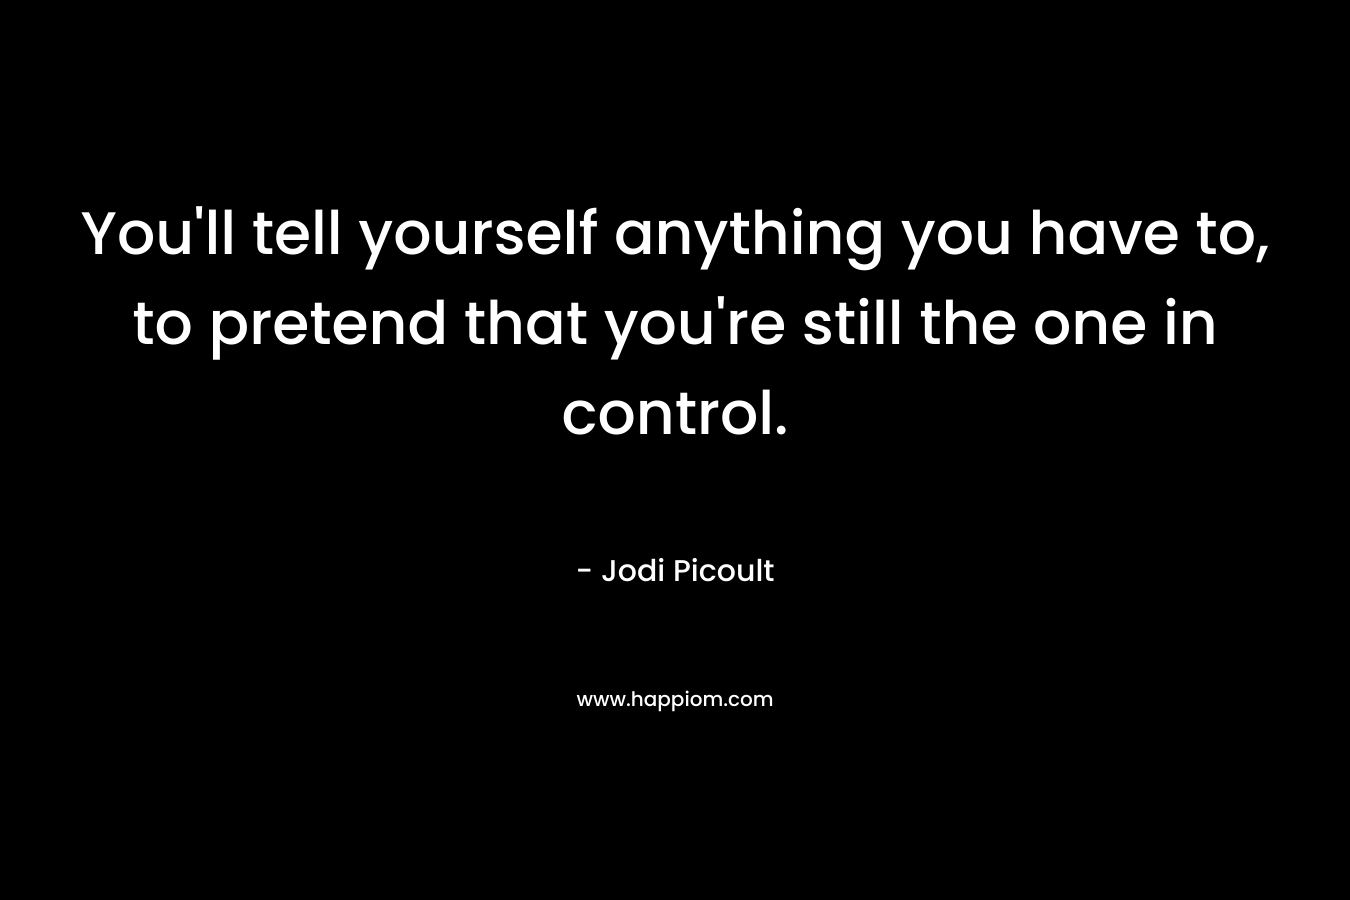 You'll tell yourself anything you have to, to pretend that you're still the one in control.